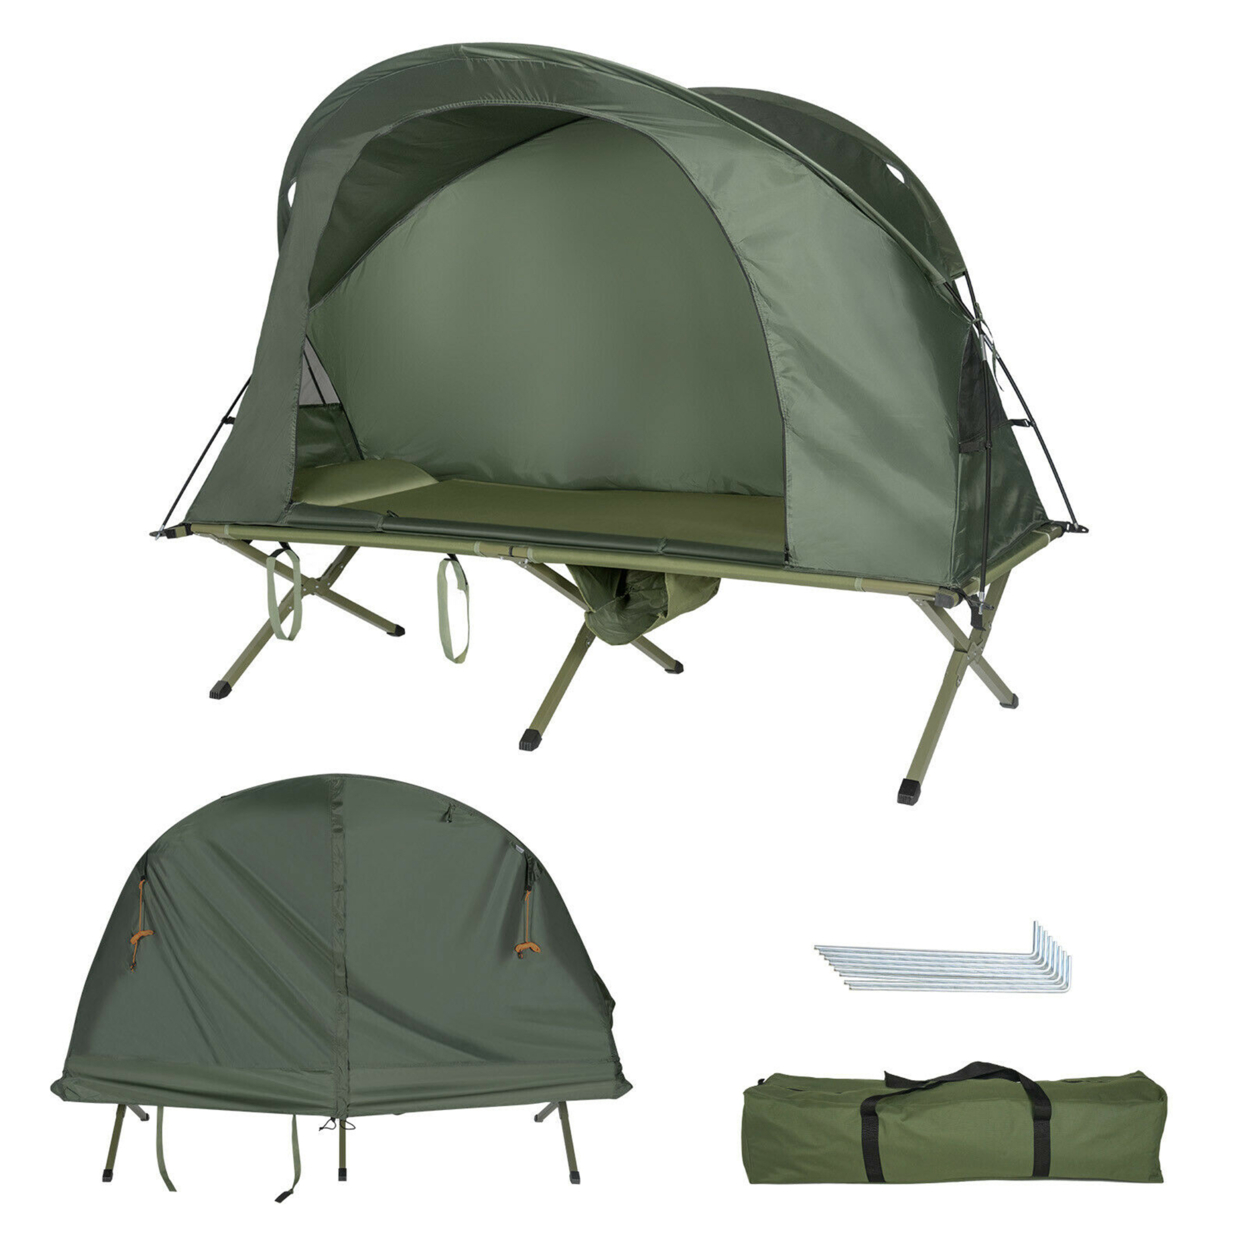 Gymax 1-Person Outdoor Camping Tent Cot Elevated Compact Tent Set W/ External Cover - Green